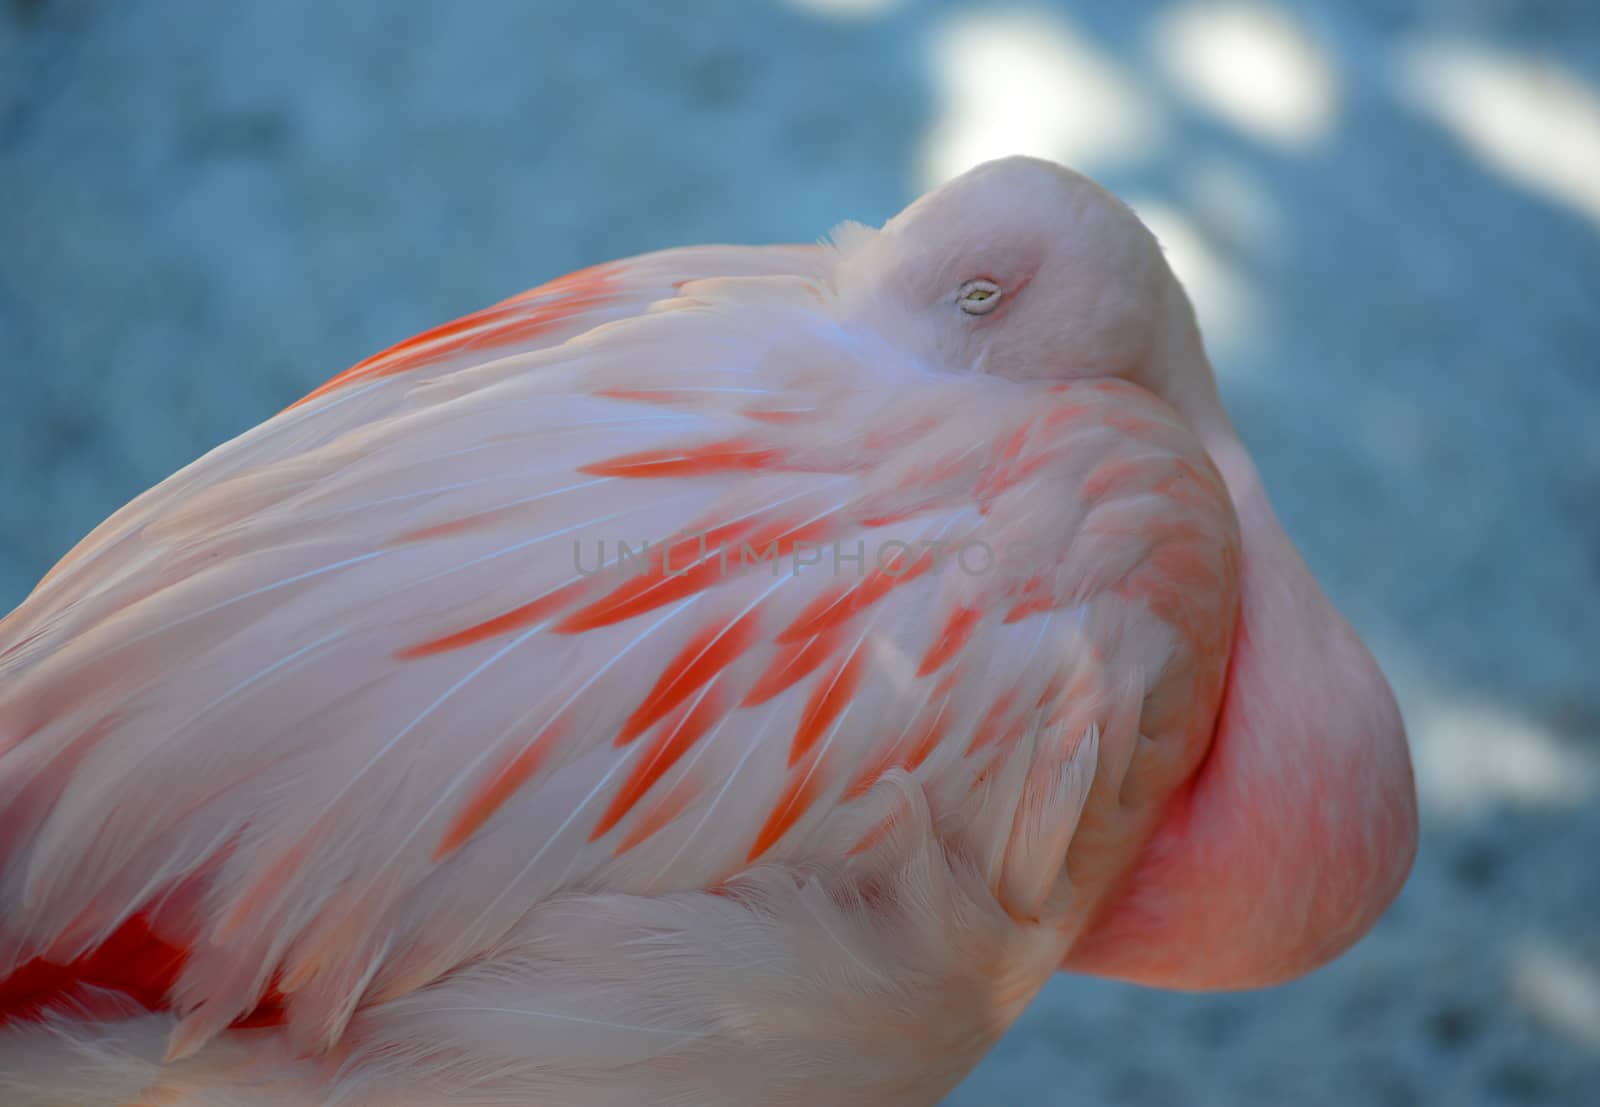 pink flamingo bird in sleep position with head buried in the body